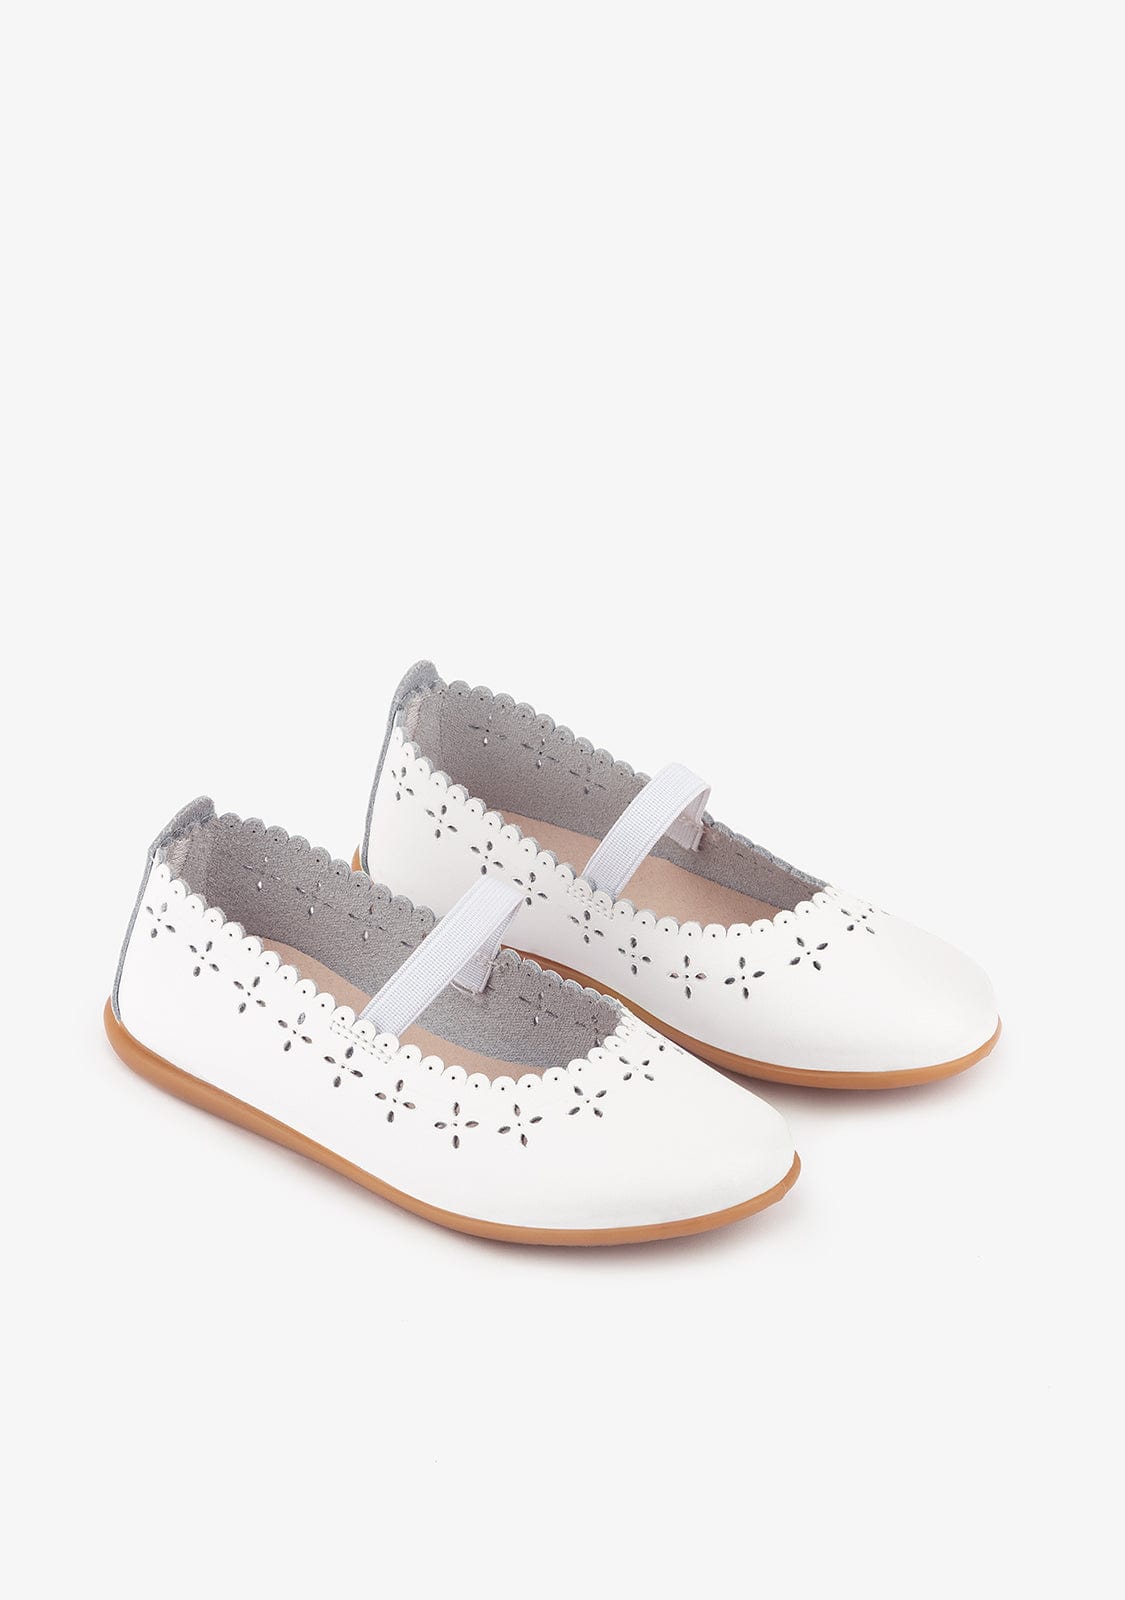 CONGUITOS Shoes Girl's White Washable Leather Ballerinas